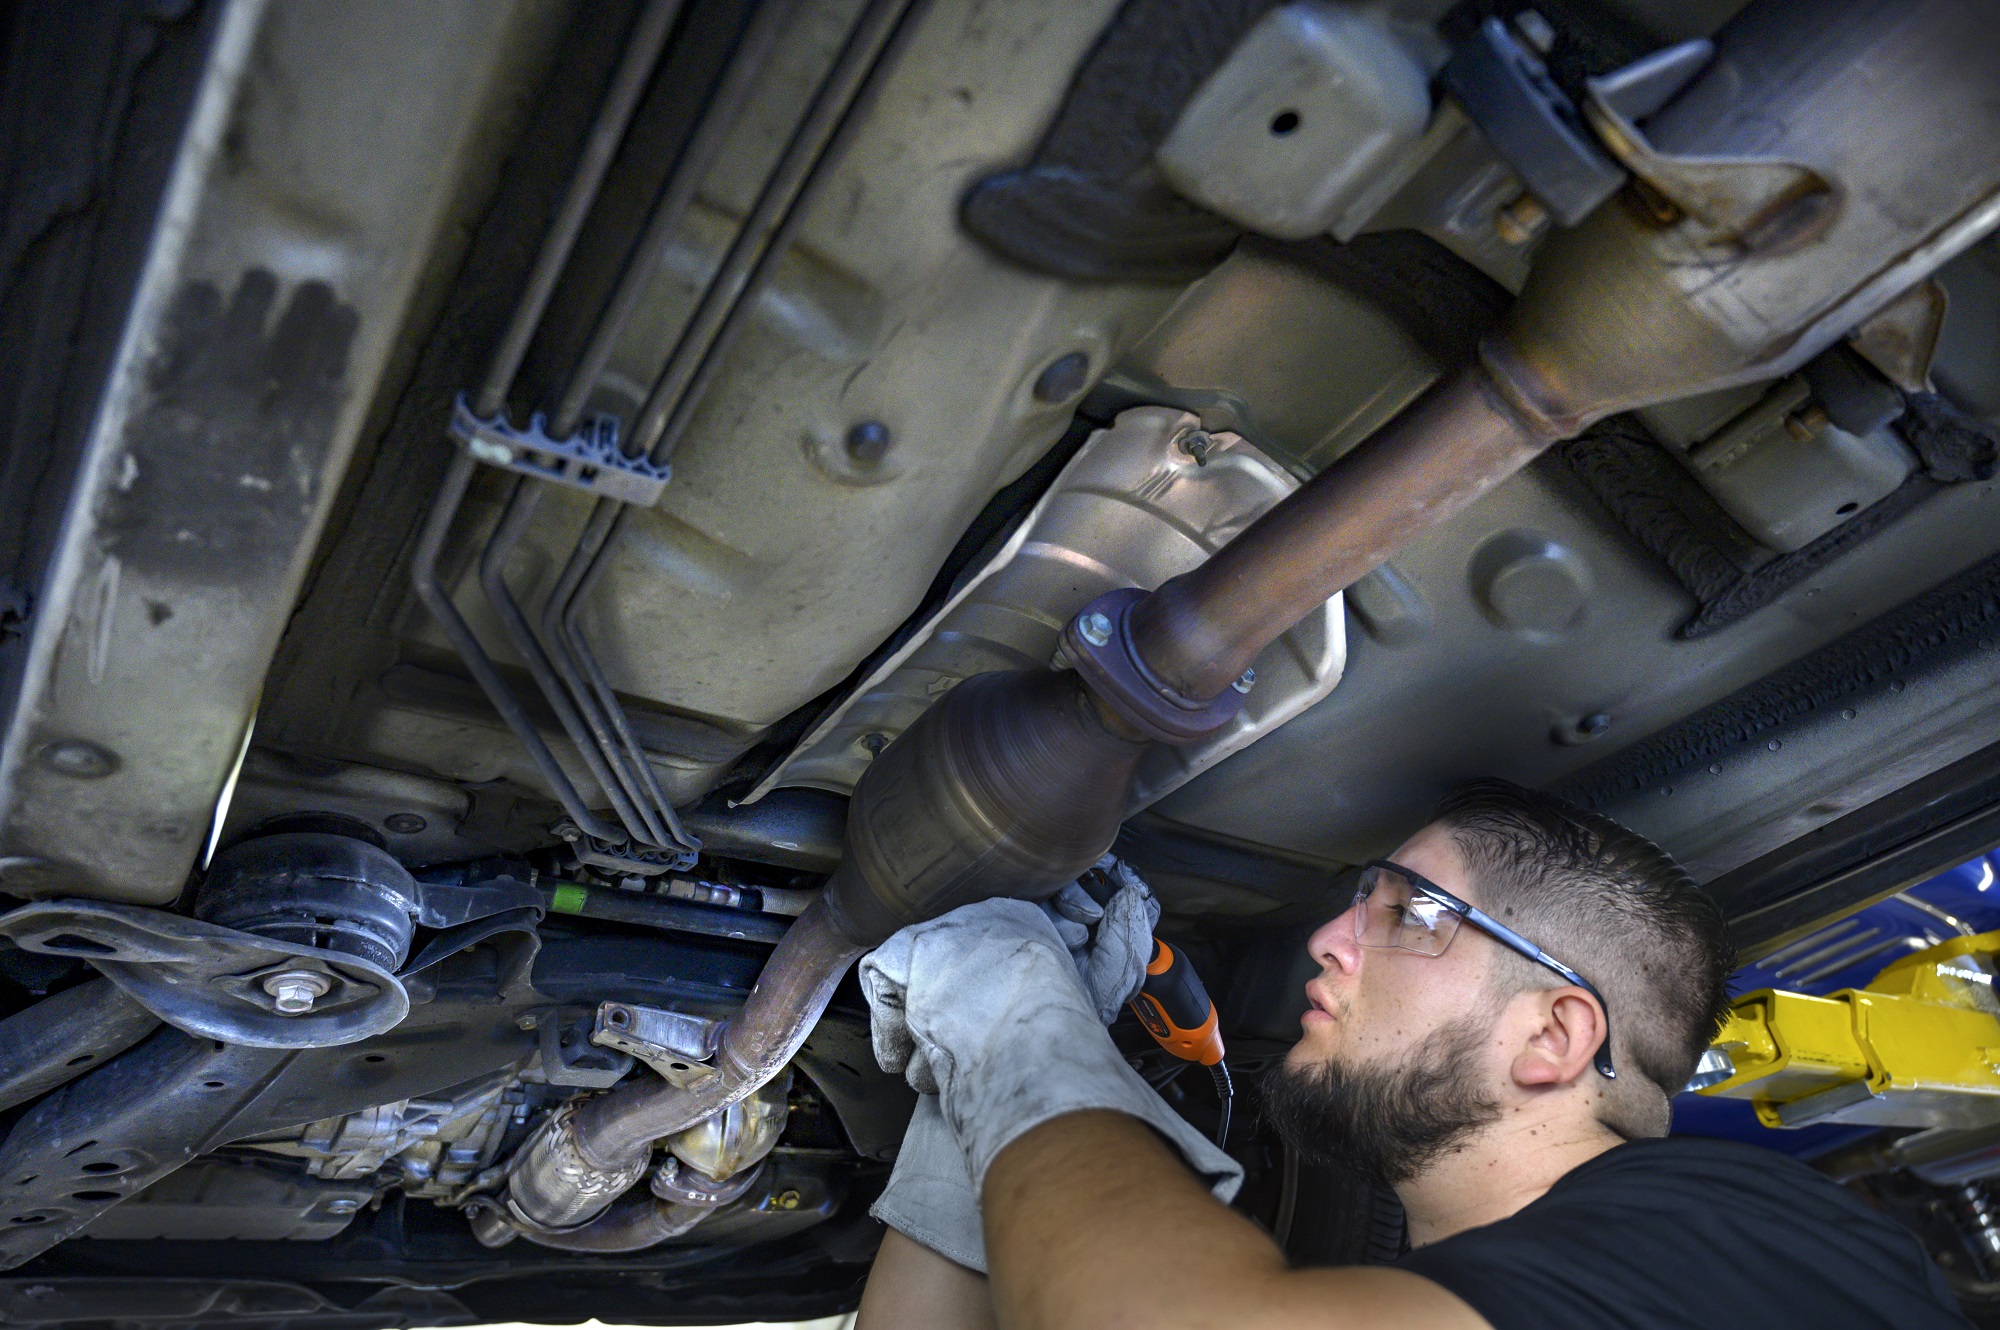 Auto tech etching numbers into catalytic converter under car to prevent theft